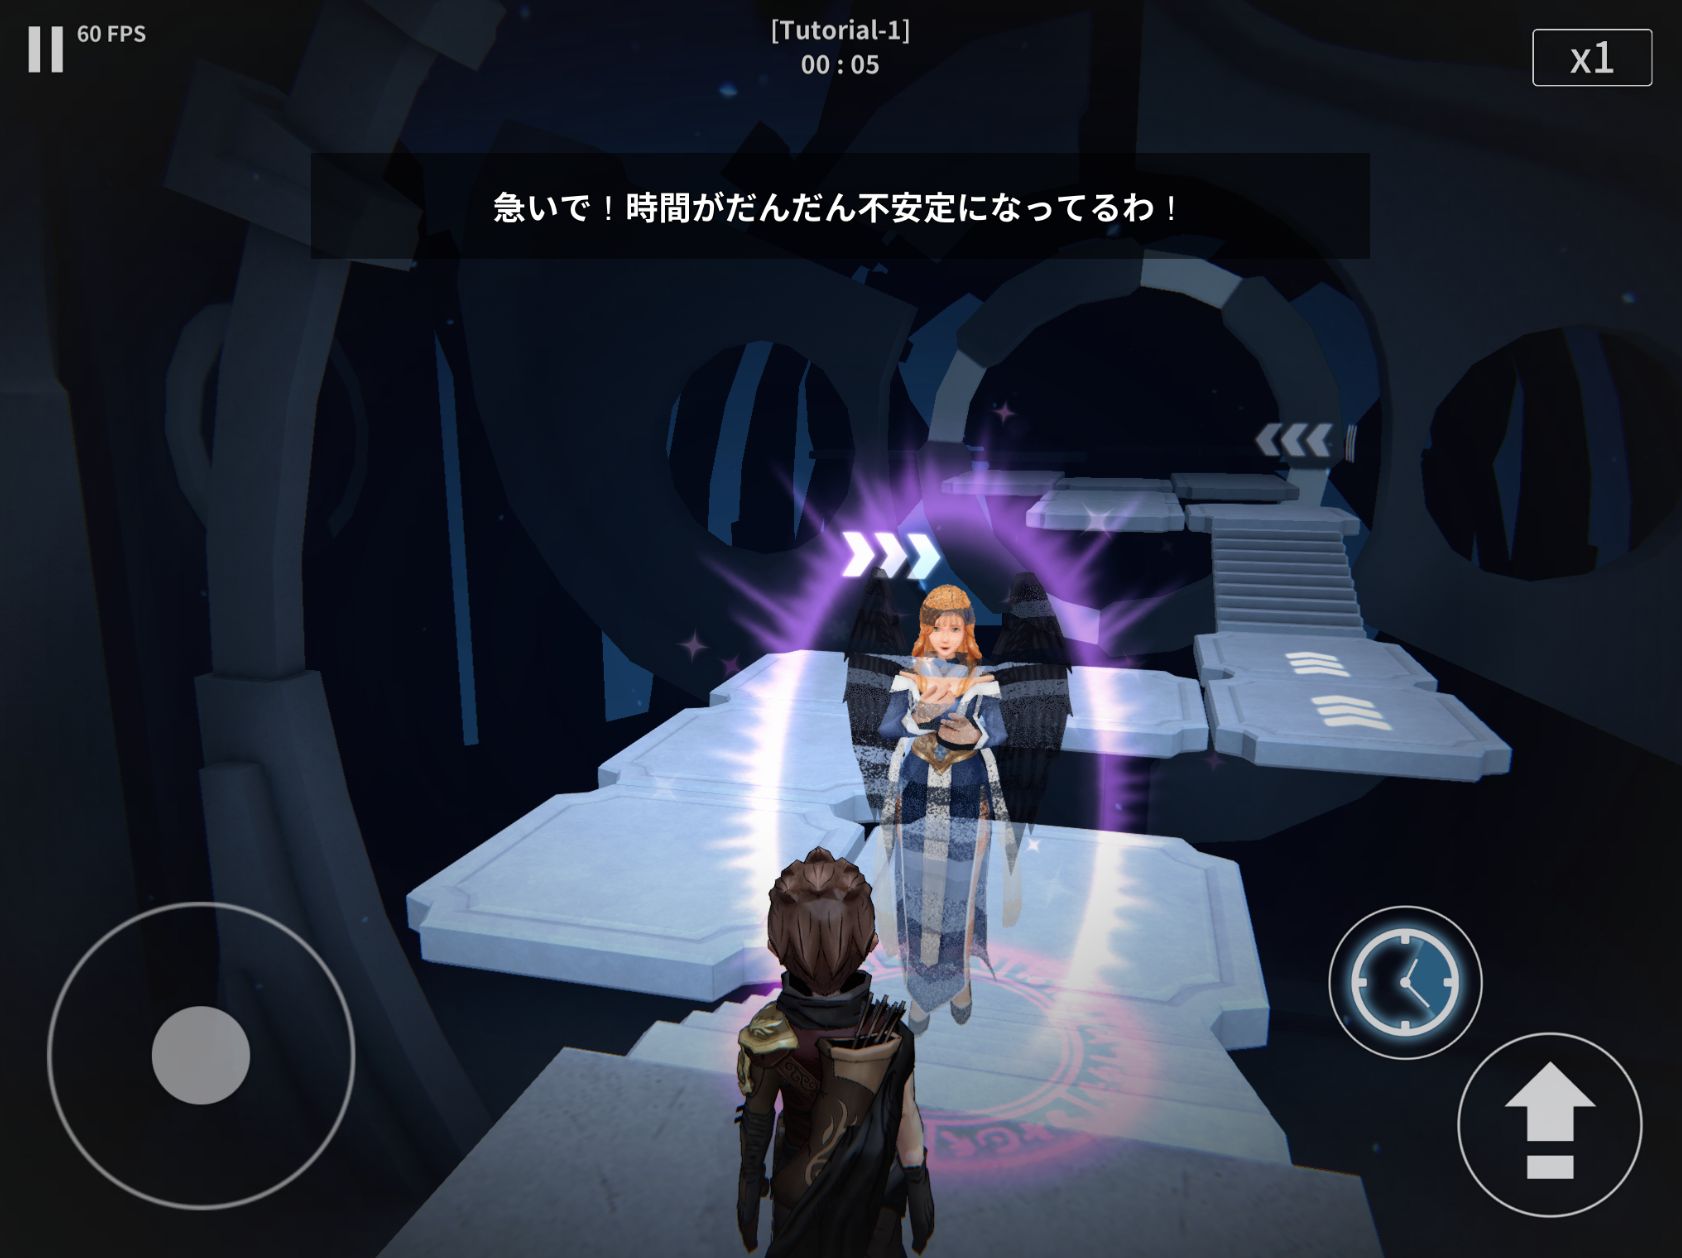 The Moment : the Temple of Time スクリーンショット1